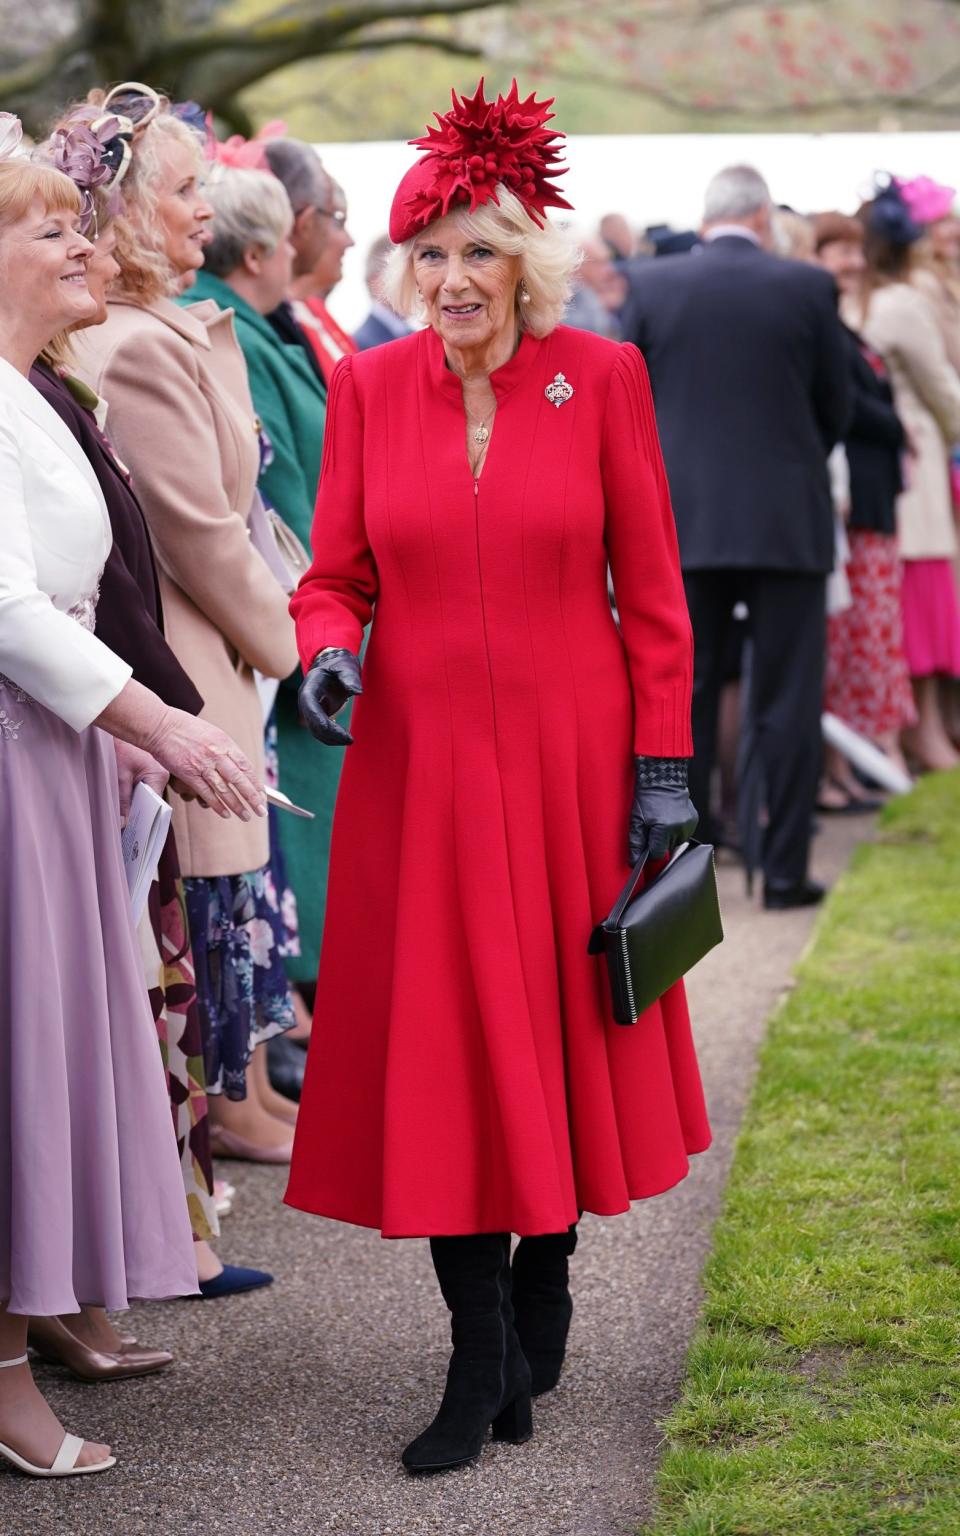 Camilla, The Queen Consort, Colonel, Grenadier Guards is seen meeting guests after a ceremony where King Charles III presented new Standards and Colours to the Royal Navy